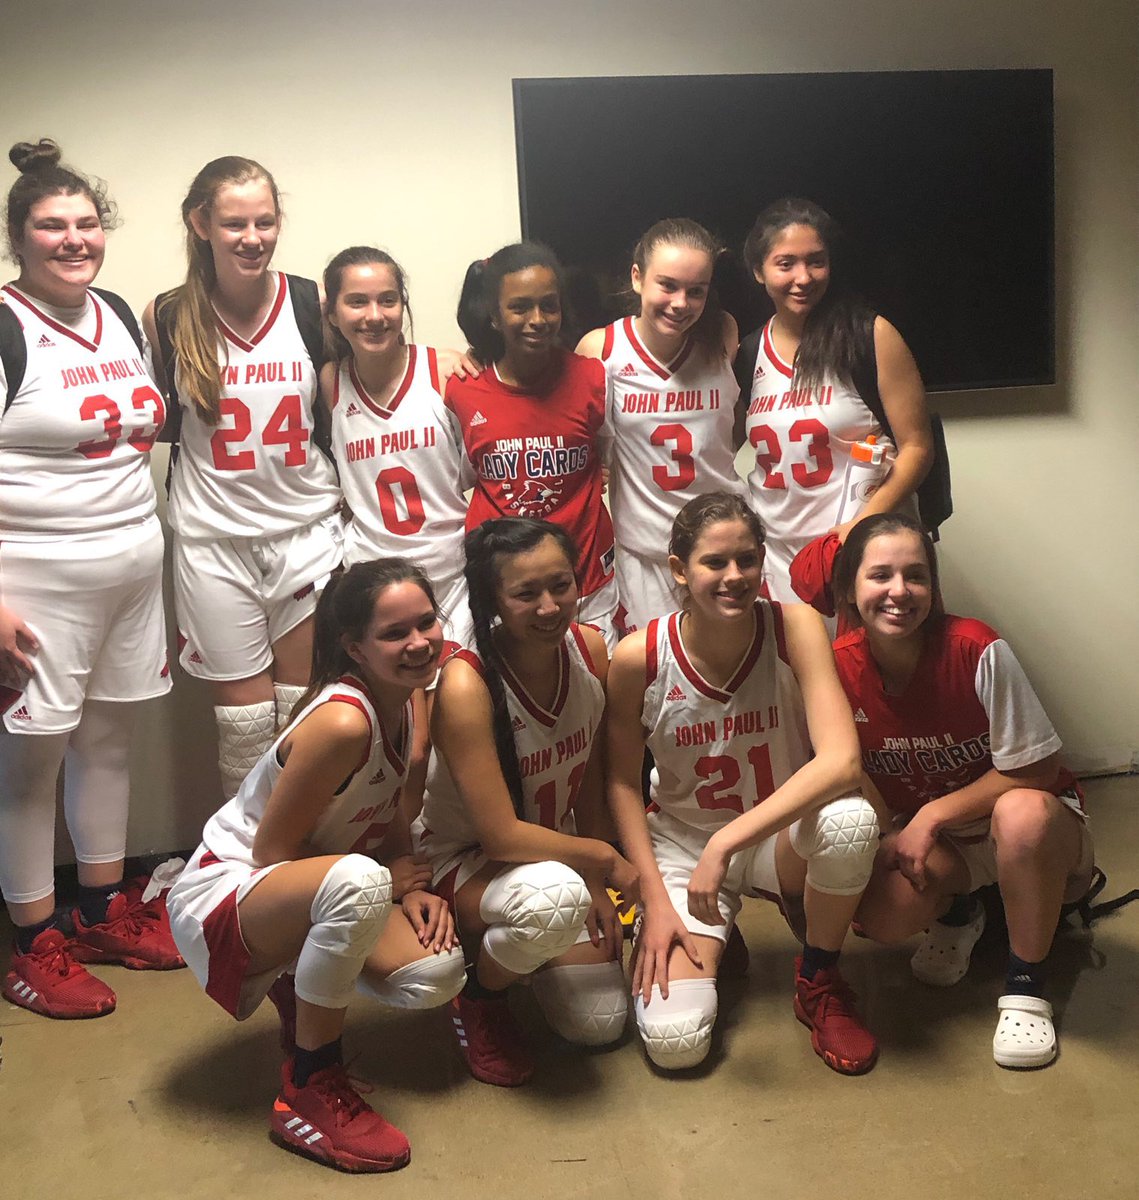 So proud of the @LadyCards_Bball JV group in their 1st win of the season #theskiesthelimit #futureisbright #one